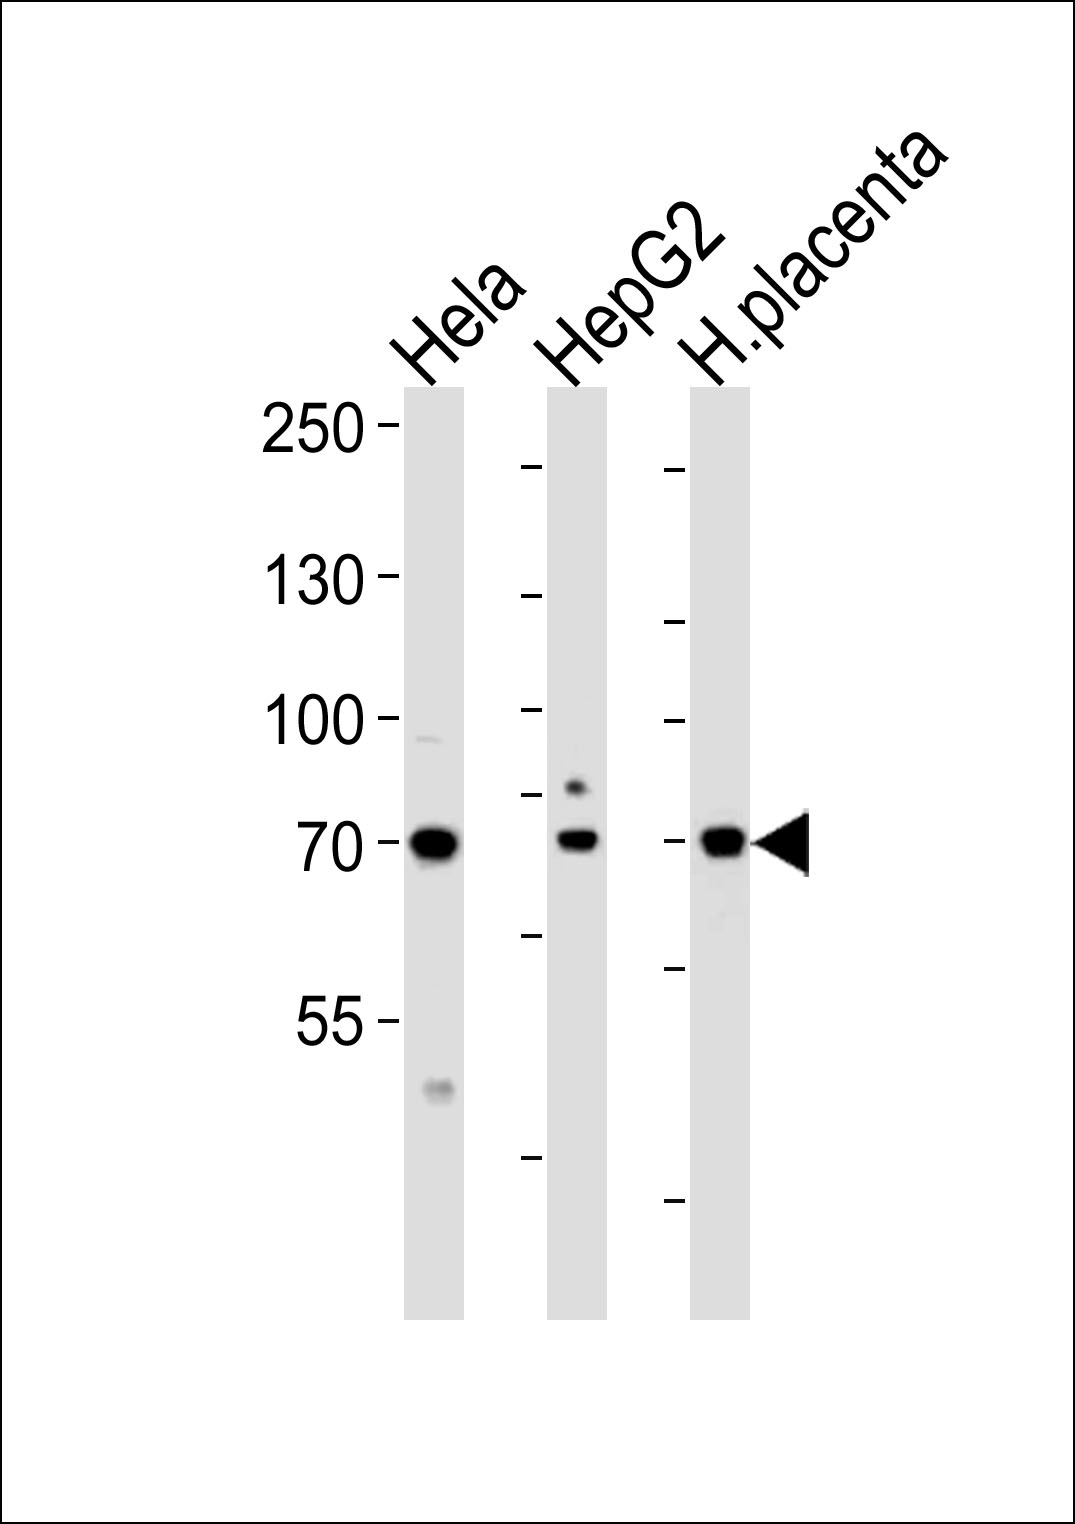 Western blot analysis of lysates from Hela, HepG2 cell line and human placenta tissue lysate (from left to right), using CREBL1Antibody (C-term) (Cat.  #AP5101b).  AP5101b was diluted at 1:1000 at each lane.  A goat anti-rabbit IgG H&L(HRP) at 1:5000 dilution was used as the secondary antibody.  Lysates at 35ug per lane.